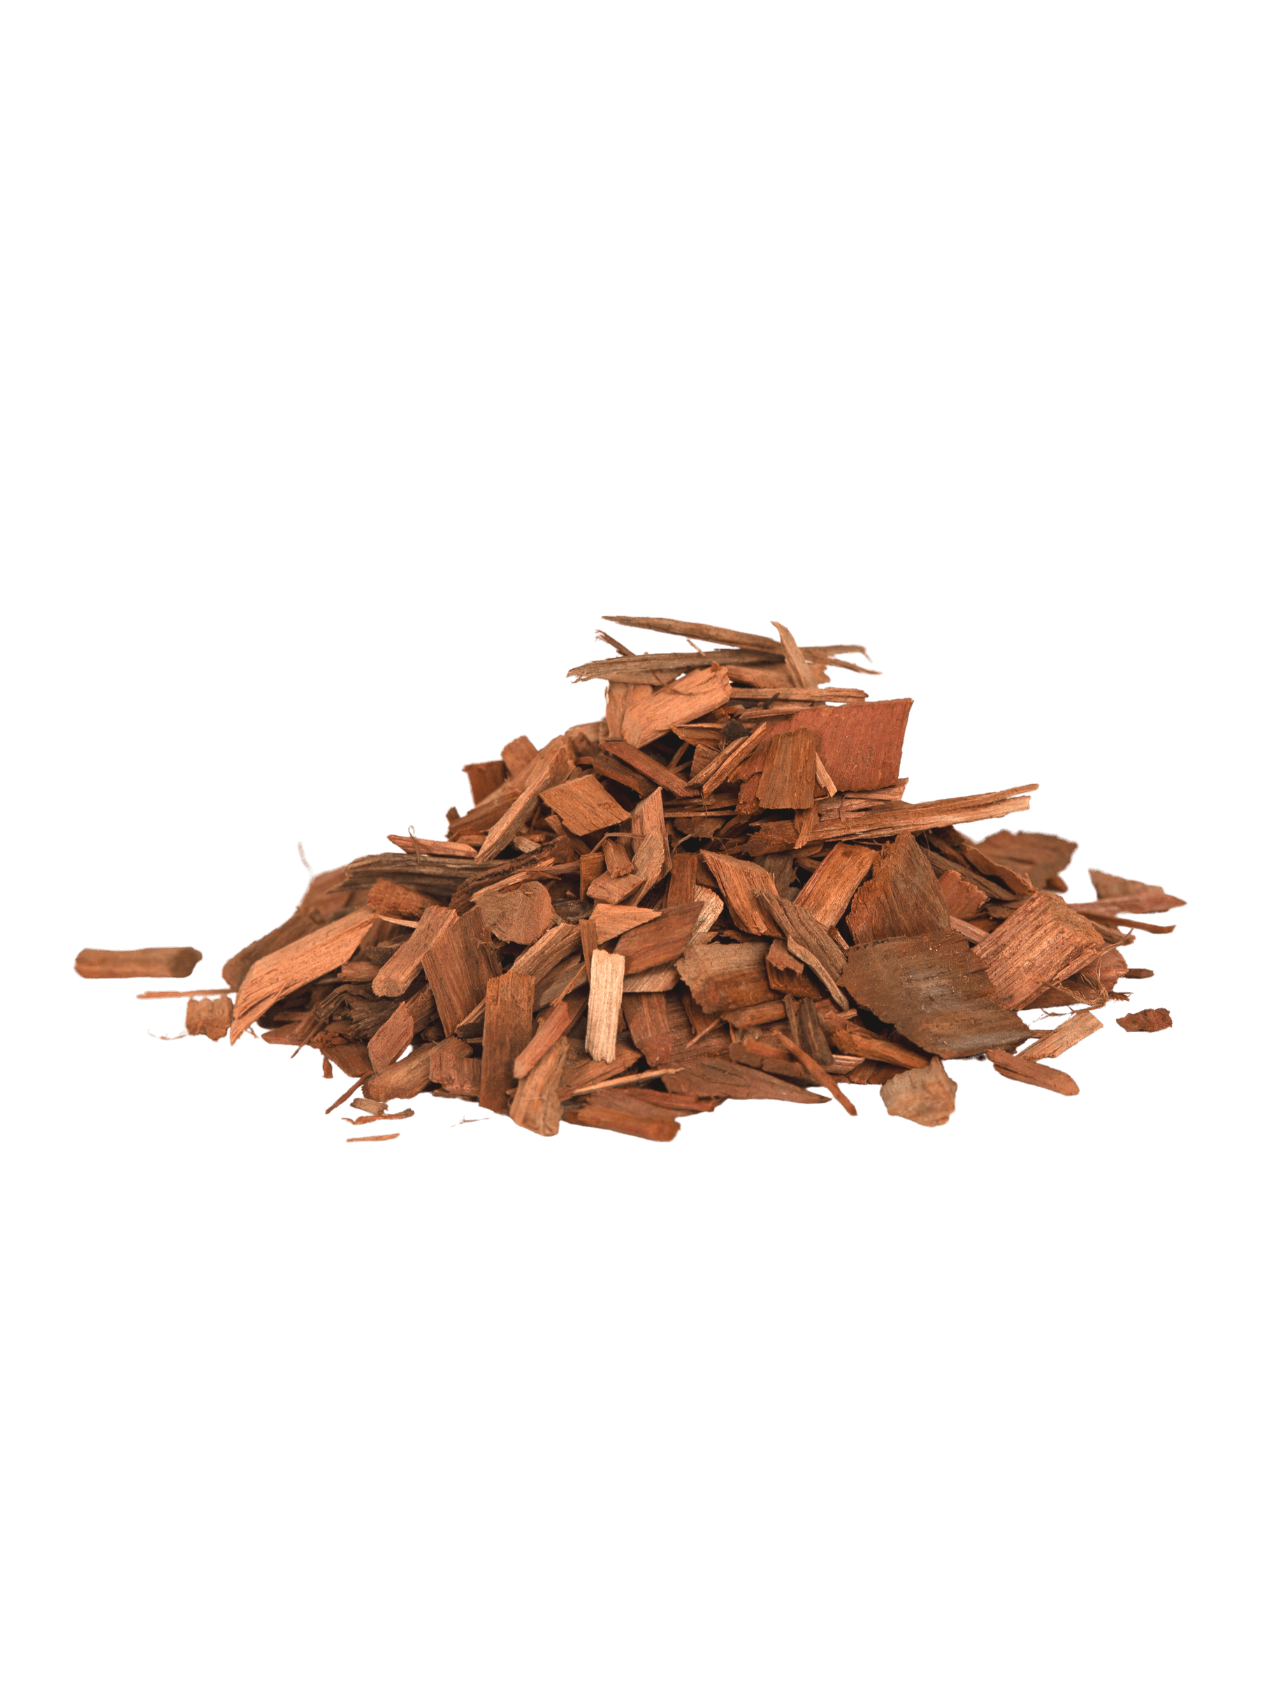 A product picture of Mulches and More's Jarrah Chip mulch.